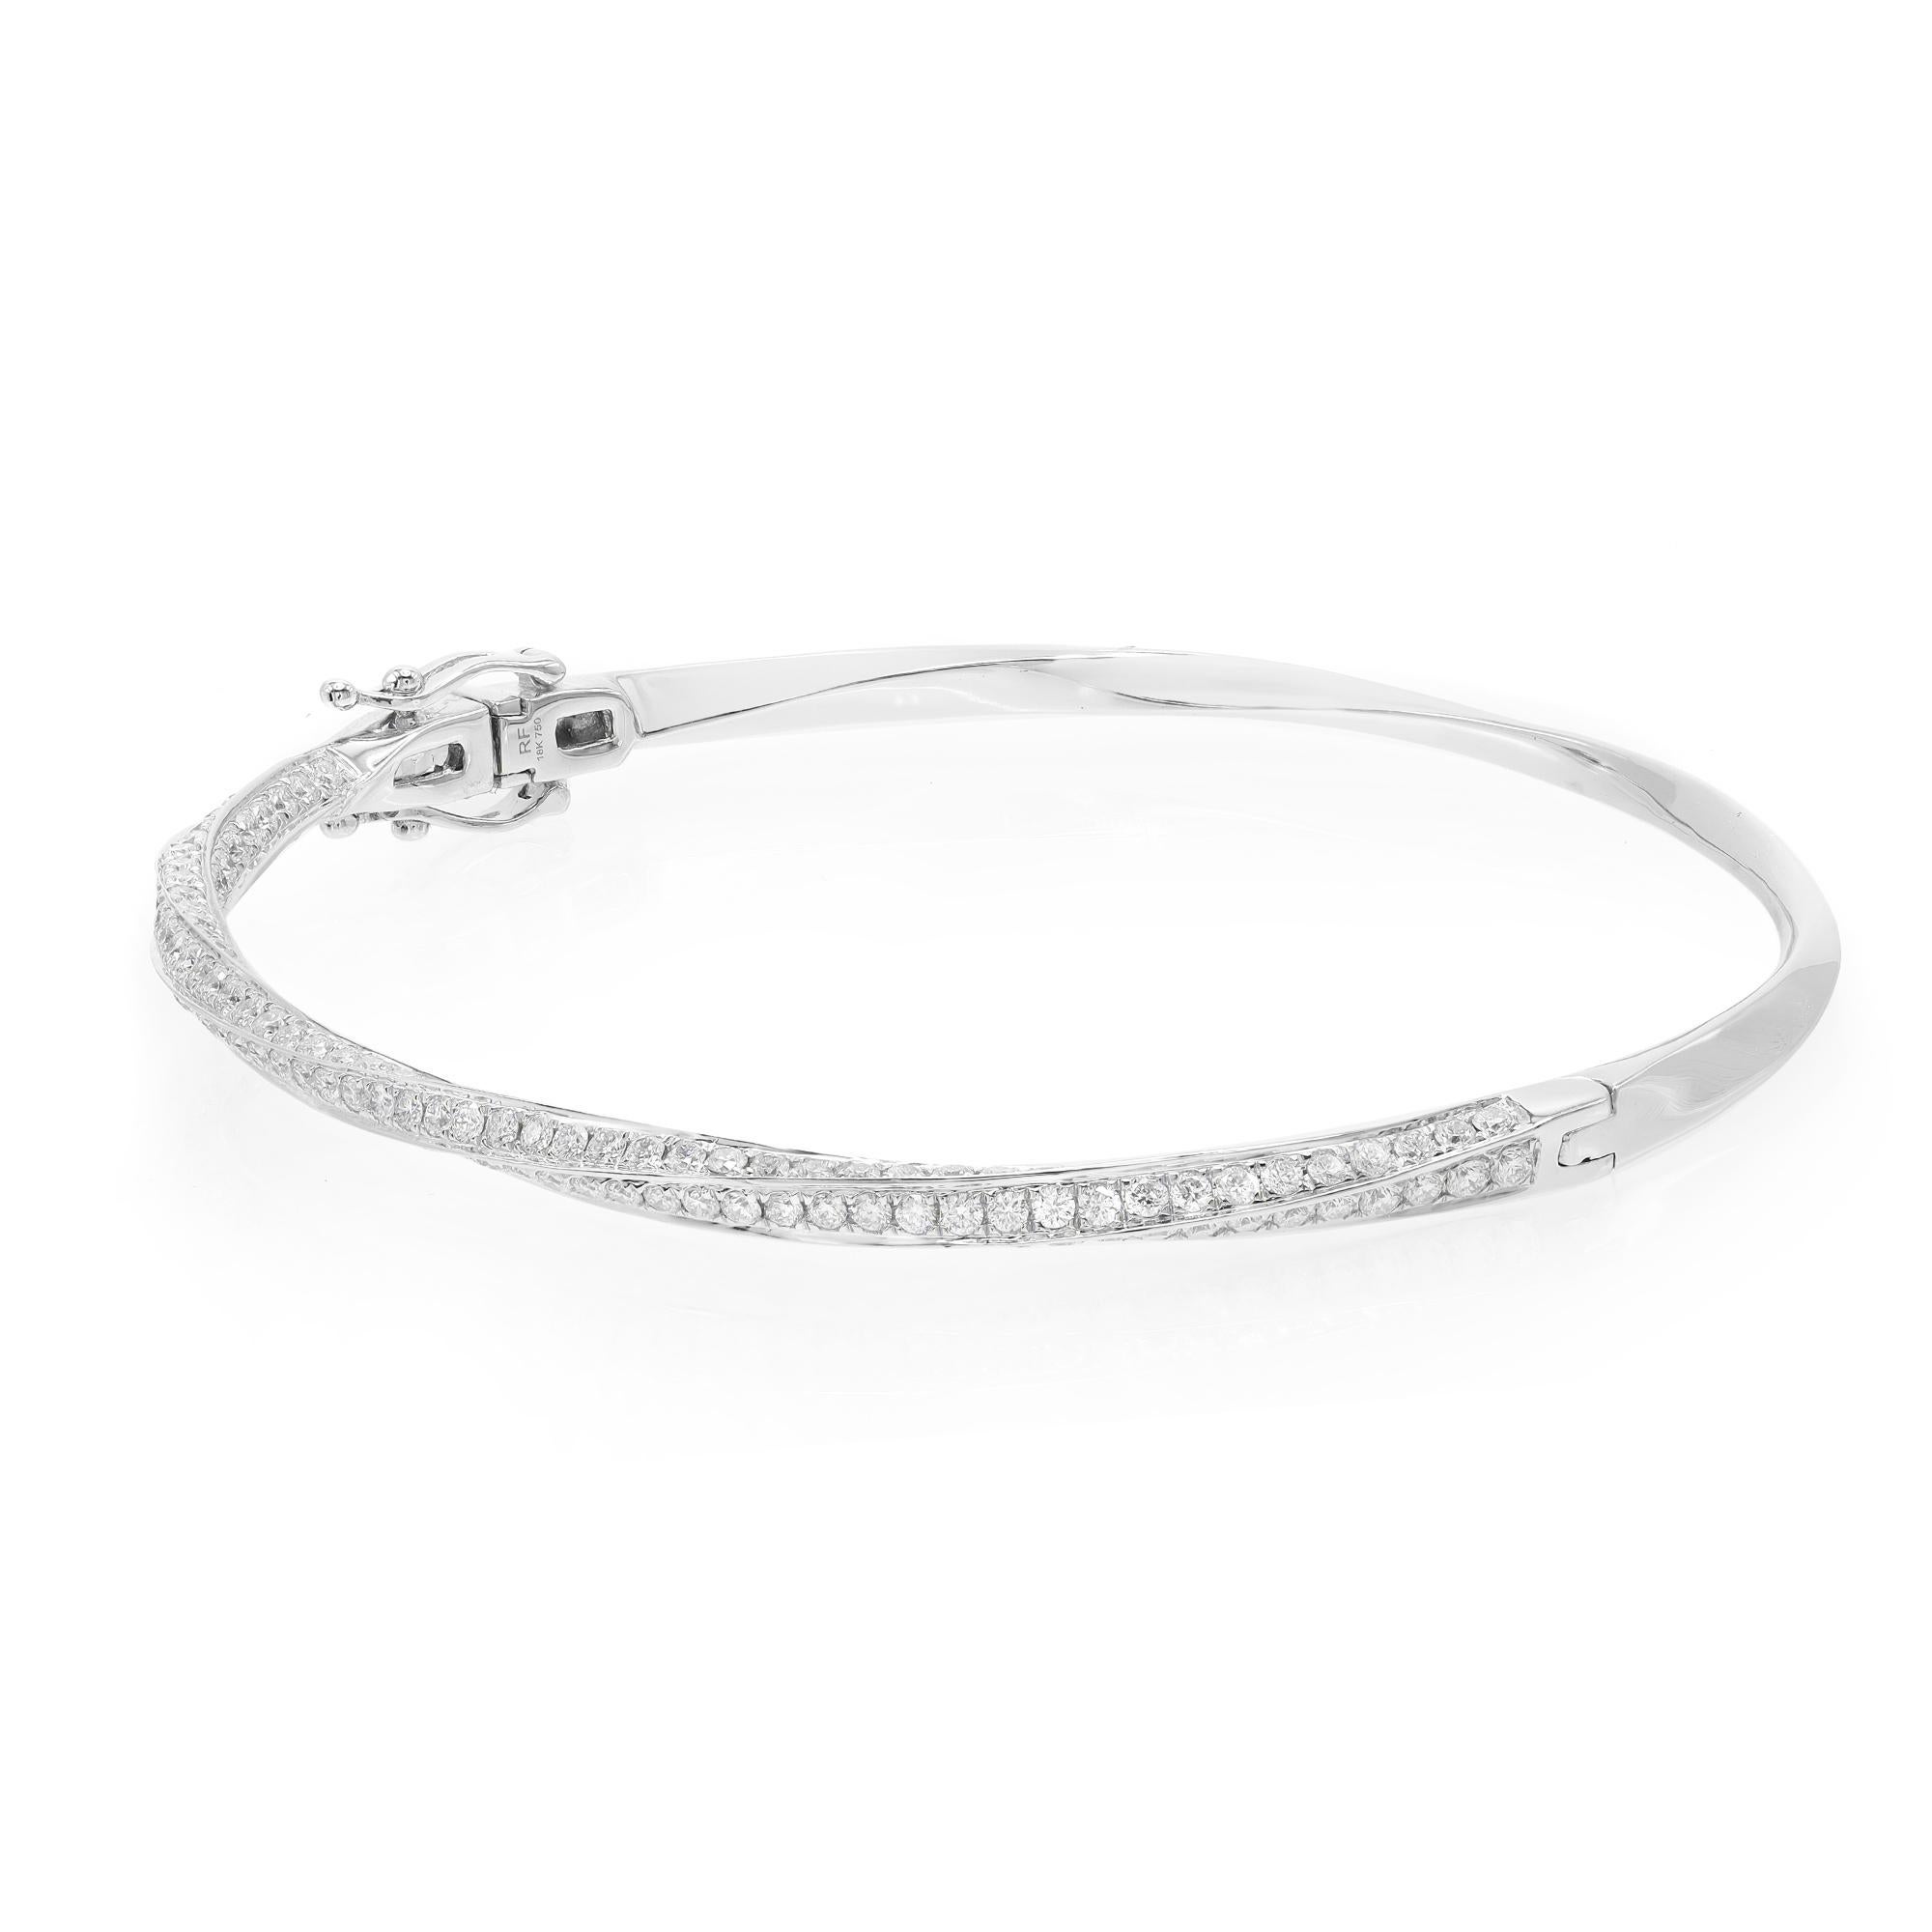 Rachel Koen Pave Set Round Cut Diamond Bangle Bracelet 18K White Gold 2.09Cttw In New Condition For Sale In New York, NY